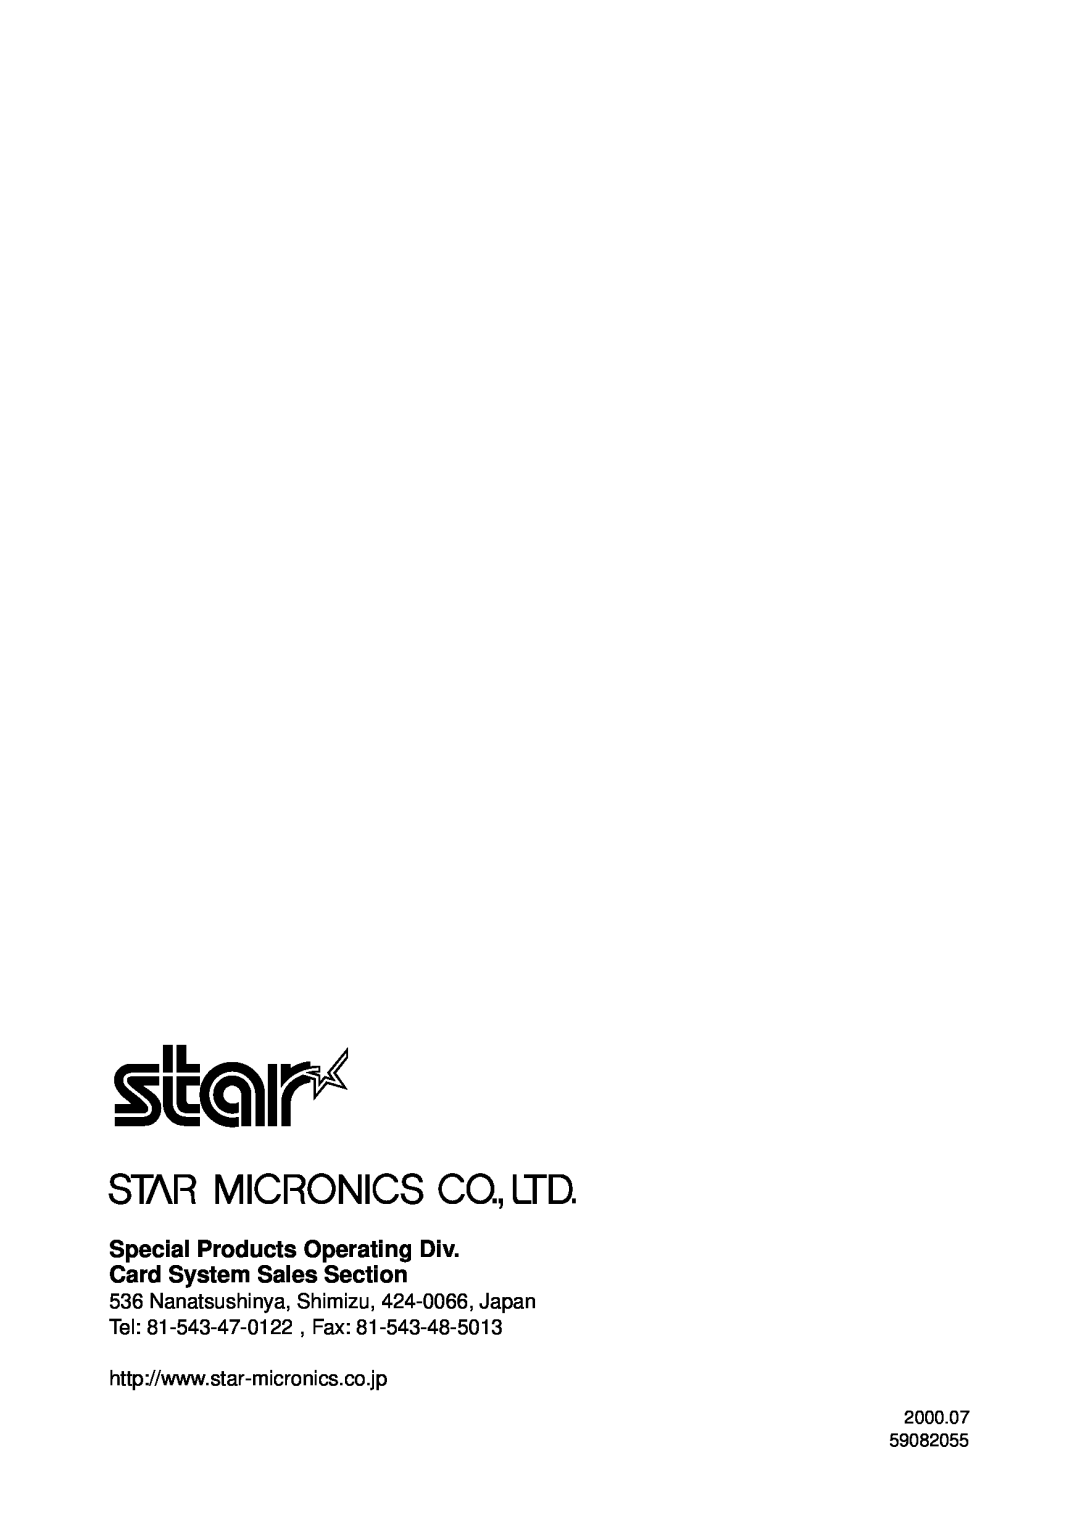 Star Micronics TCP100 Series, TCP2000 Series Special Products Operating Div Card System Sales Section, 2000.07 